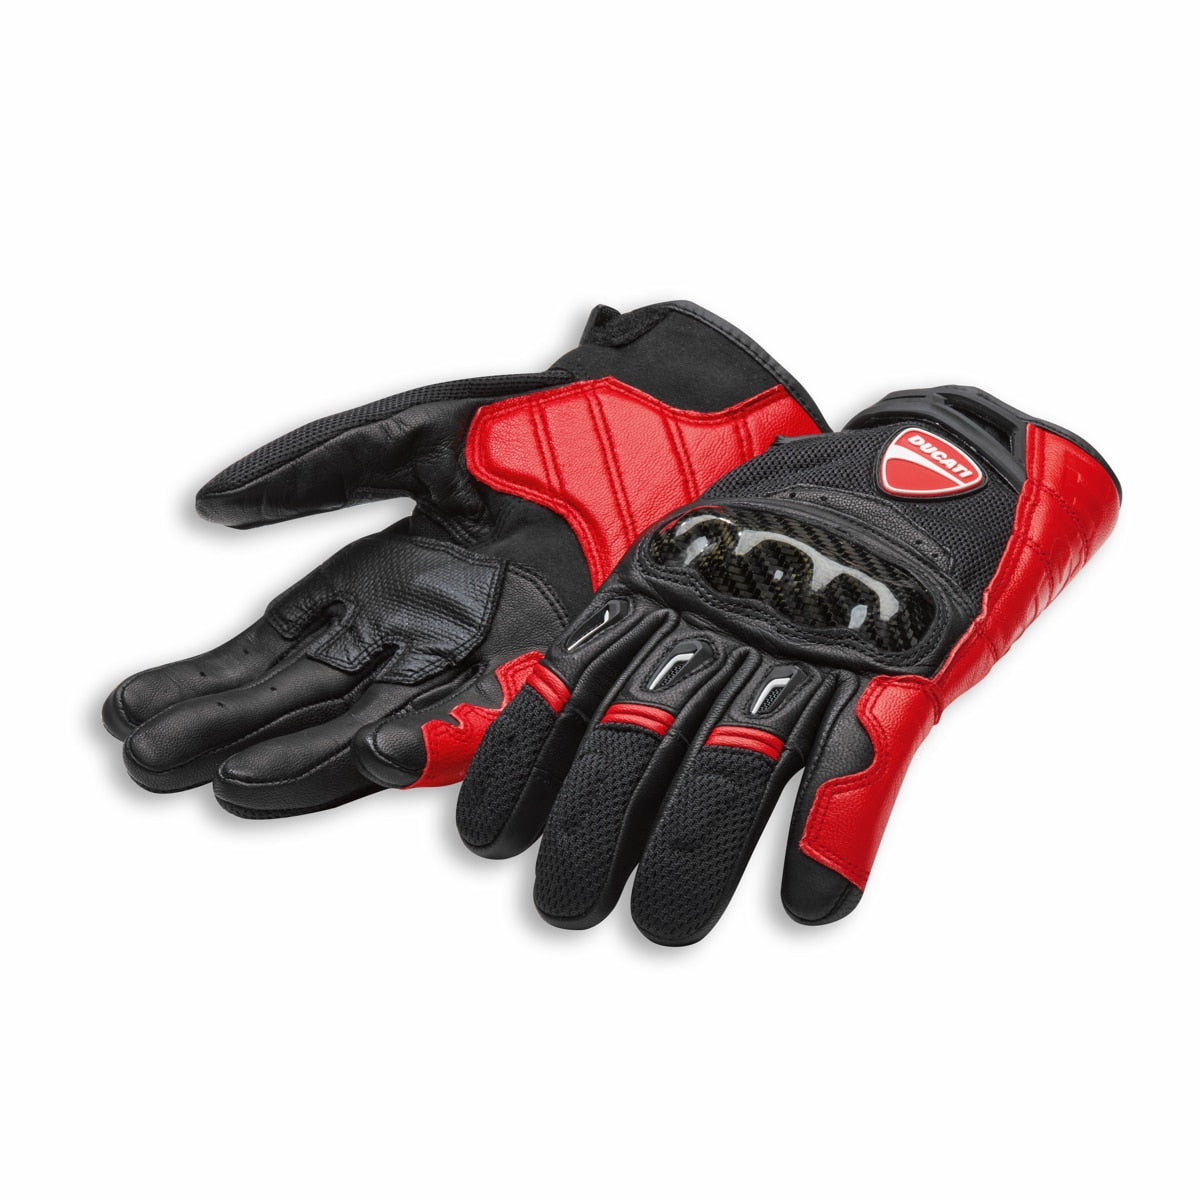 Company C1 - Fabric-Leather Gloves